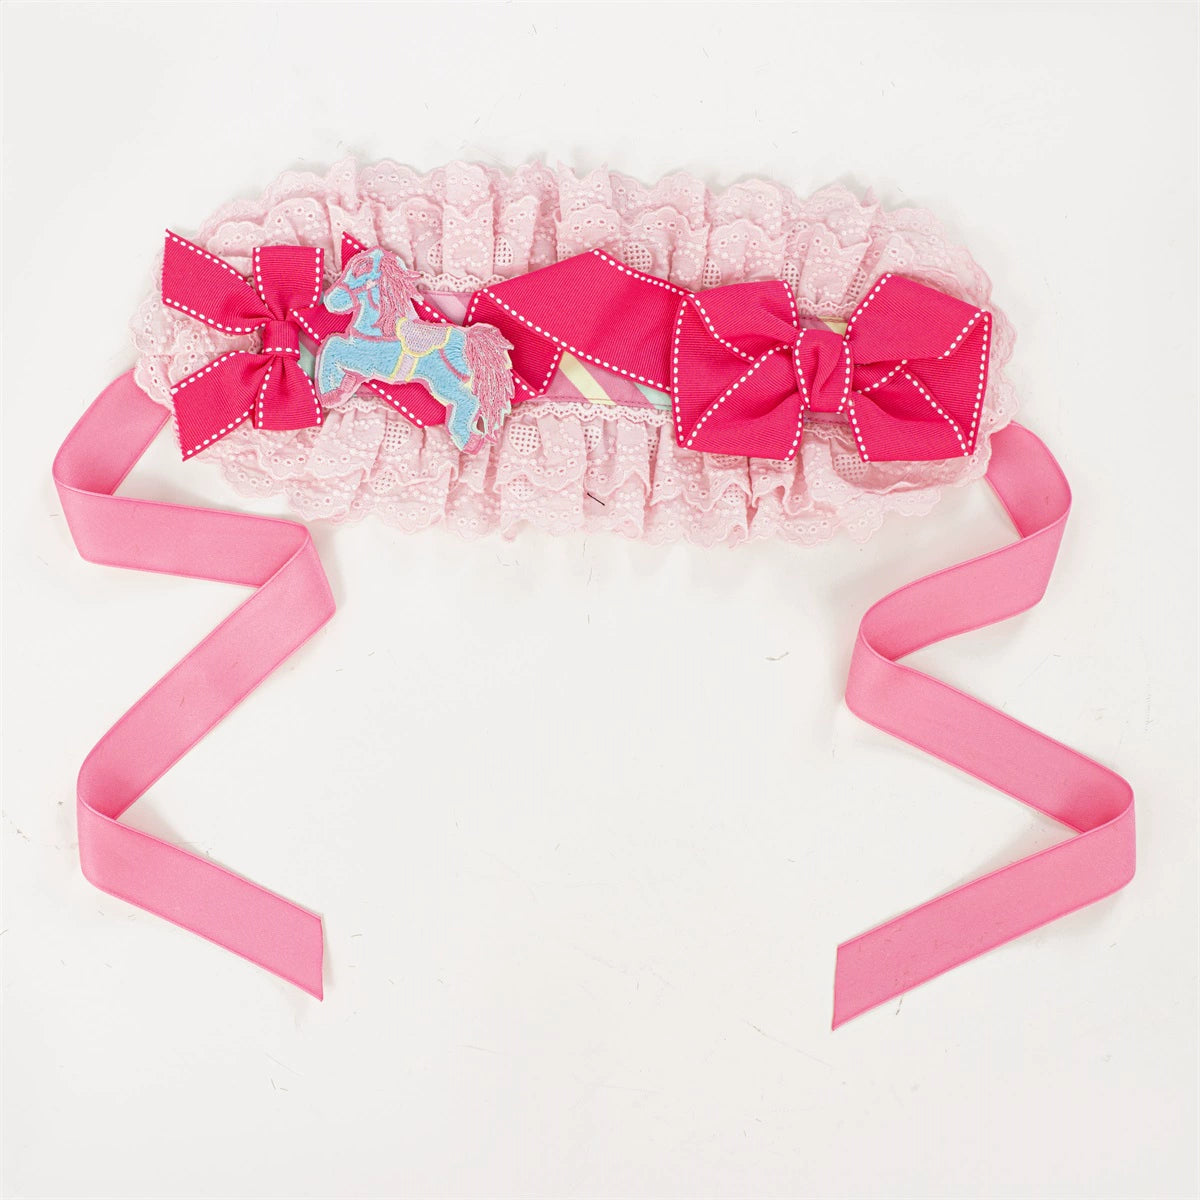 (Buyforme)Letters from Unknown Star~Candy Park Salopette Sweet Lolita Jumper Dress Set S hairband only 